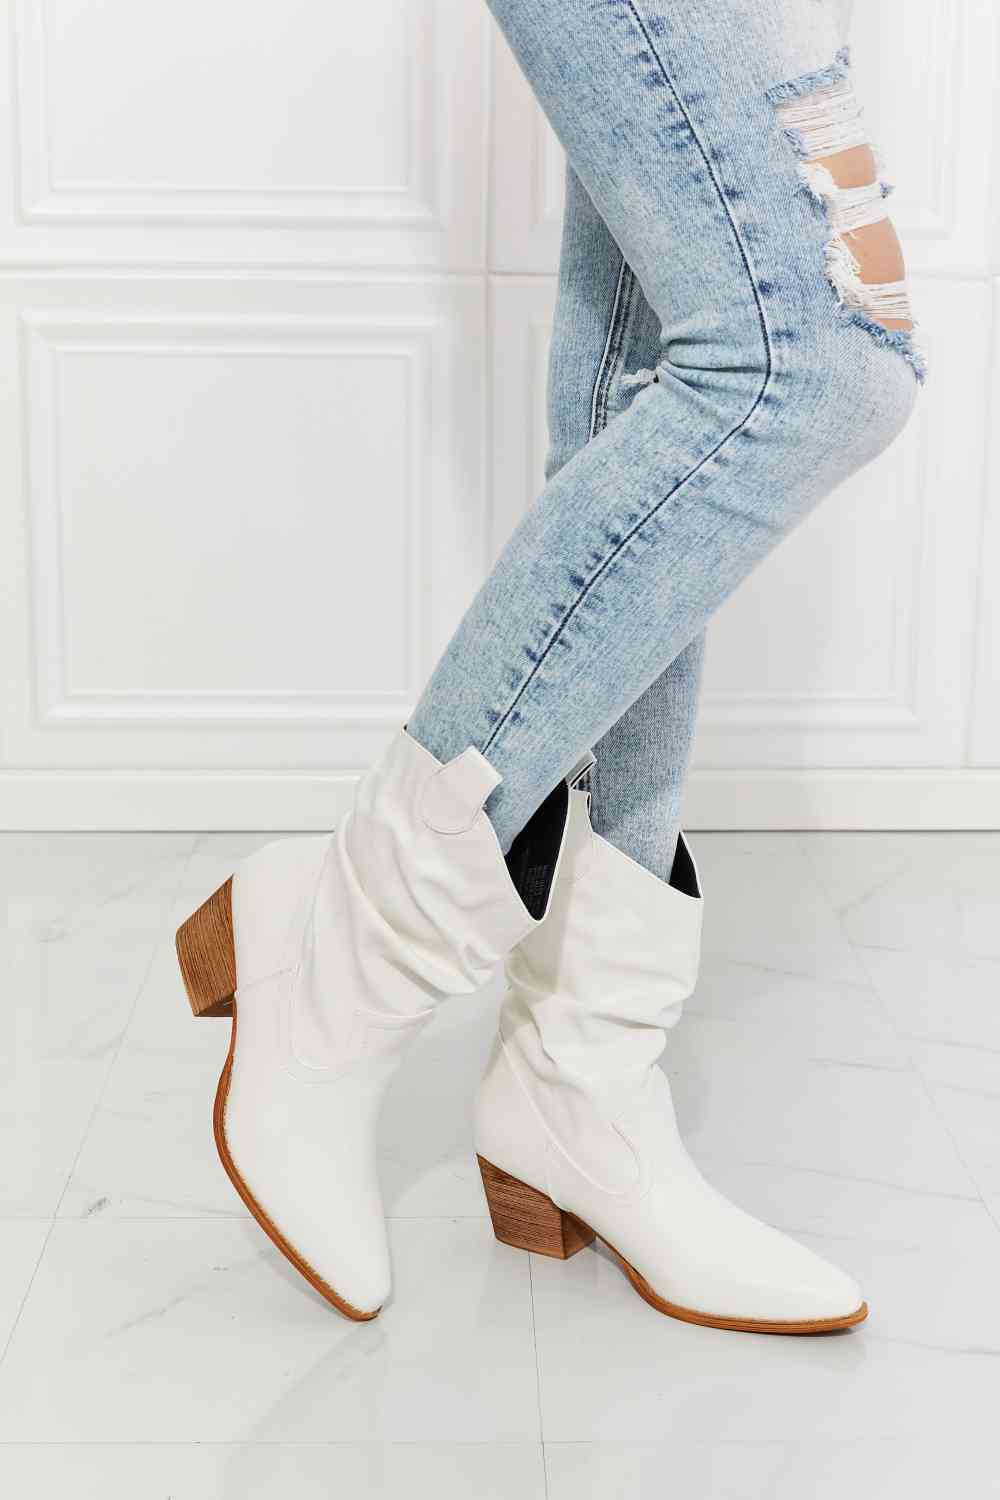 MMShoes Better in Texas Scrunch Cowboy Boots in White - lolaluxeshop